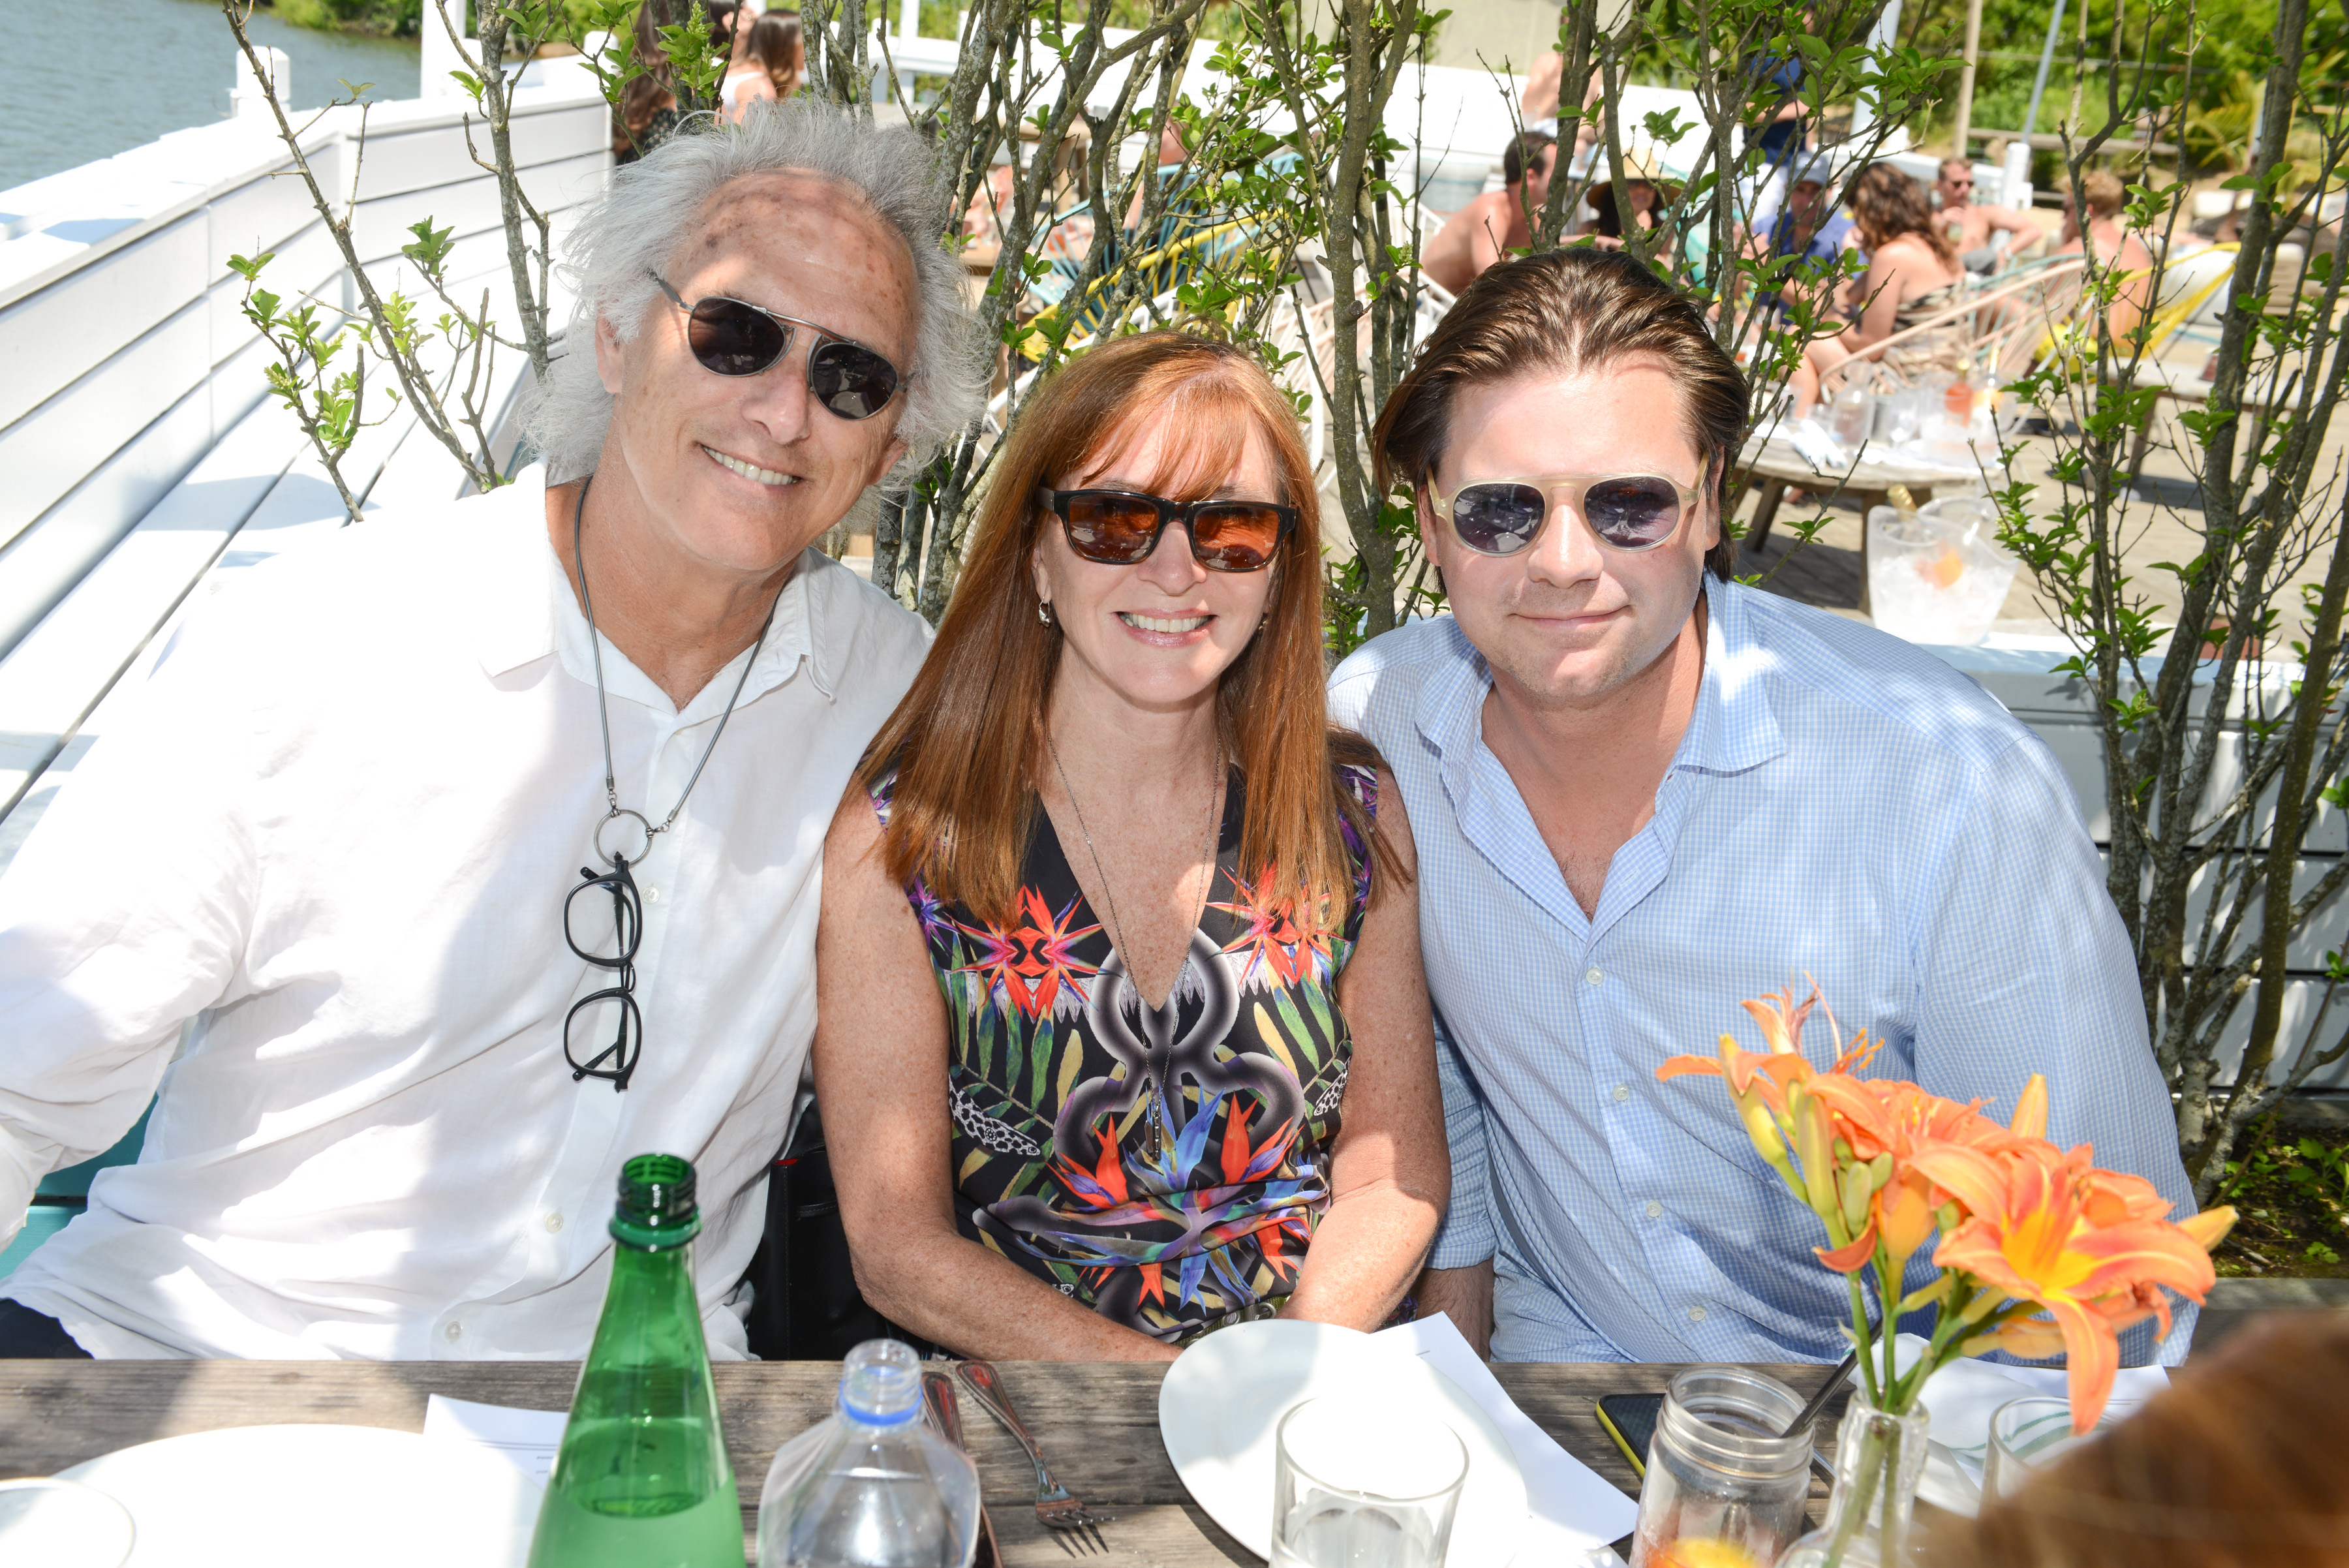 Eric Fischl, Nicole Miller, and James Salomon at the Parrish Art Museum's Contemporaries Circle Brunch at the Surf Lodge. Courtesy of Madison McGaw/BFA.